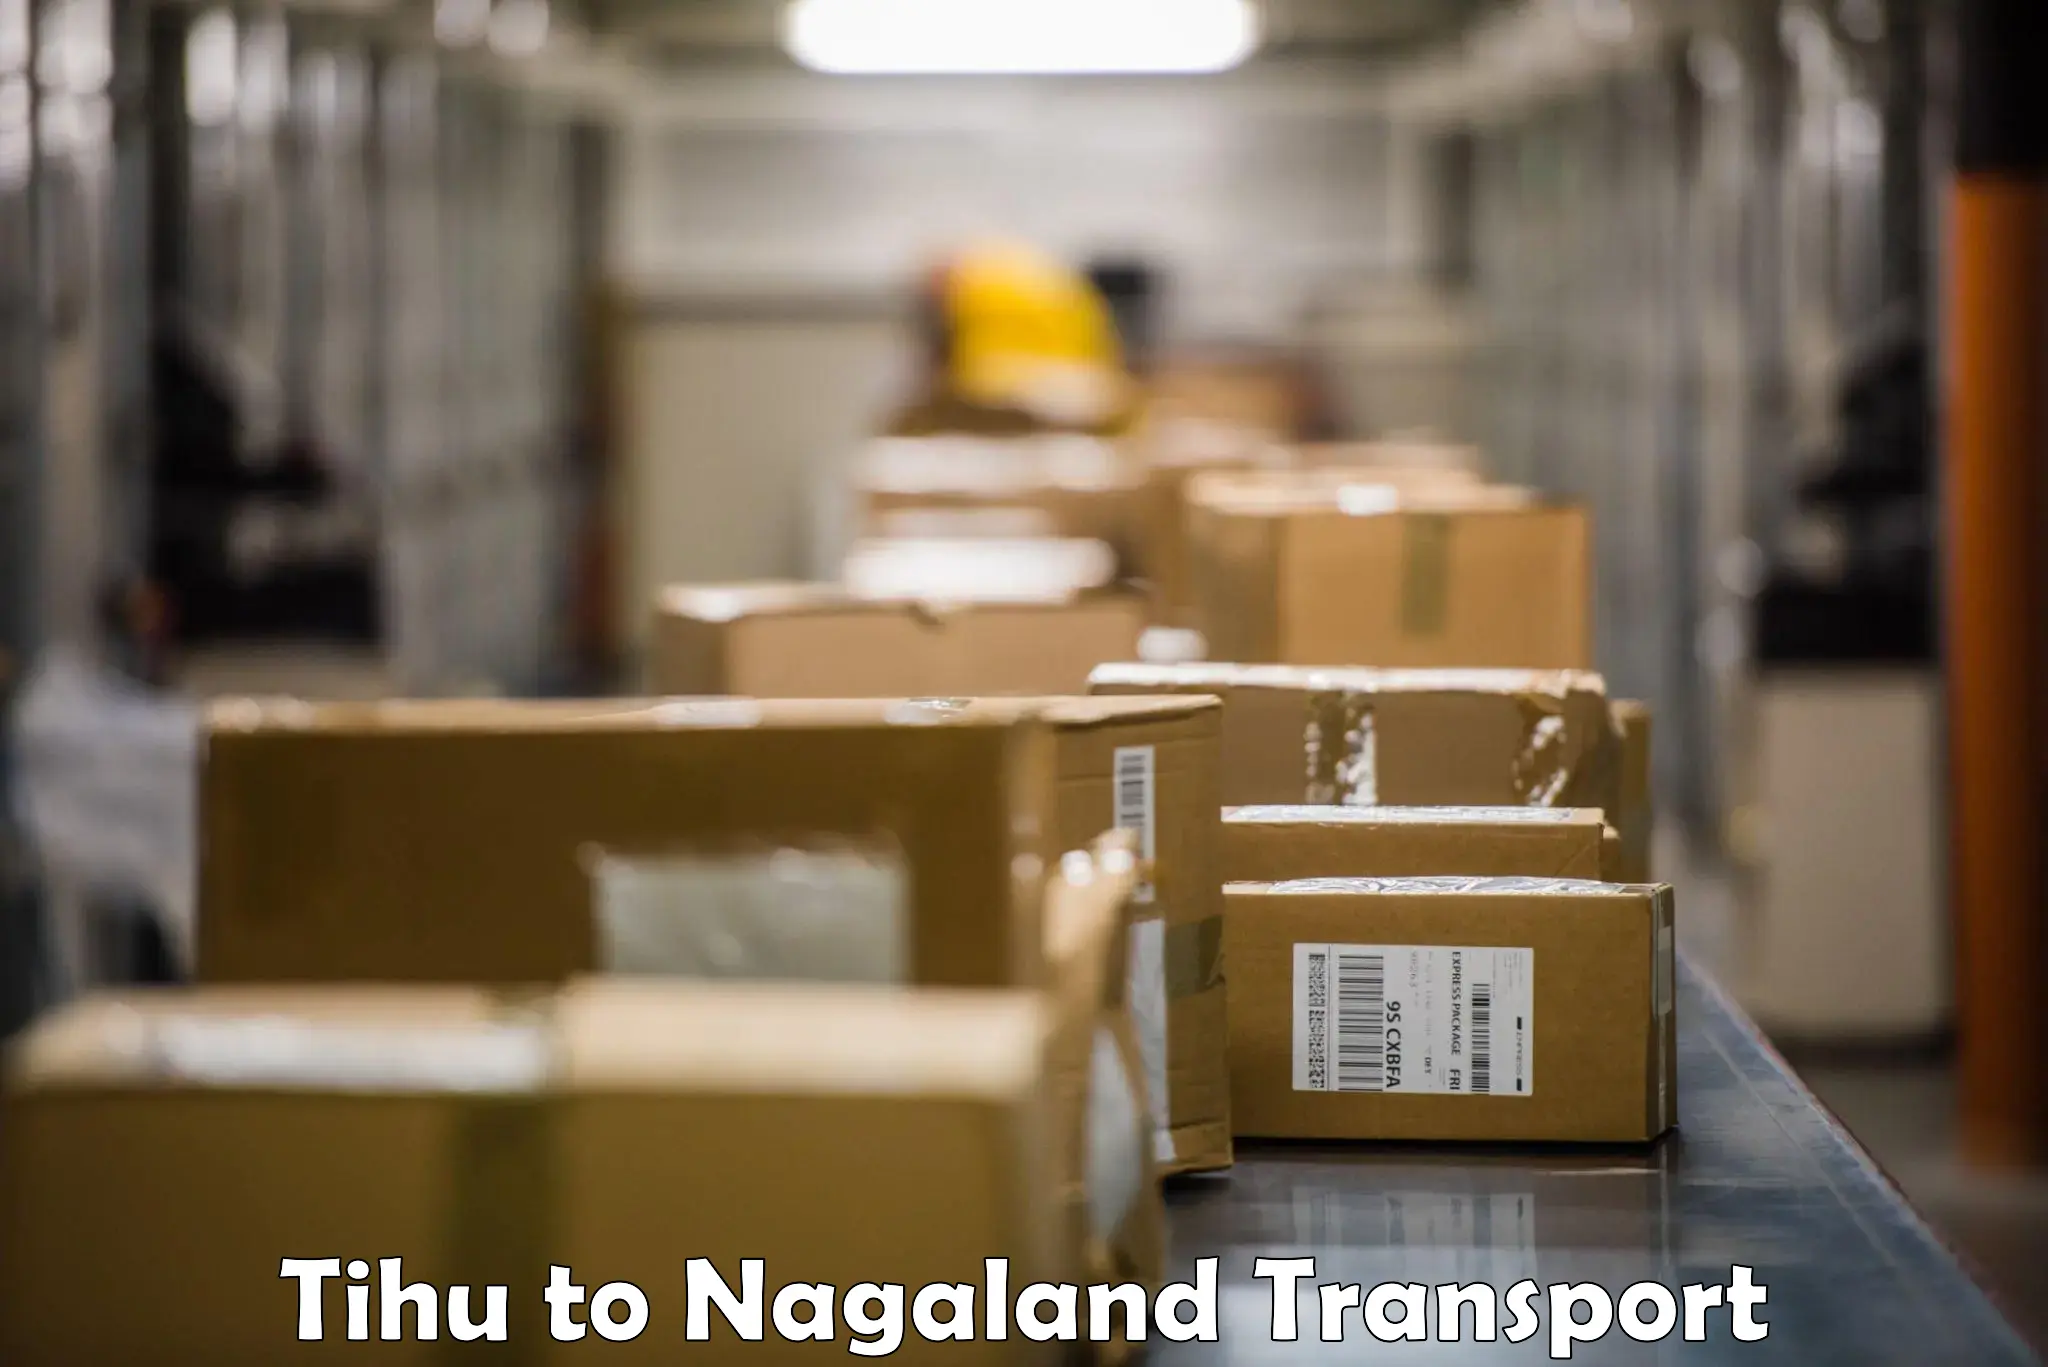 Daily transport service in Tihu to Nagaland